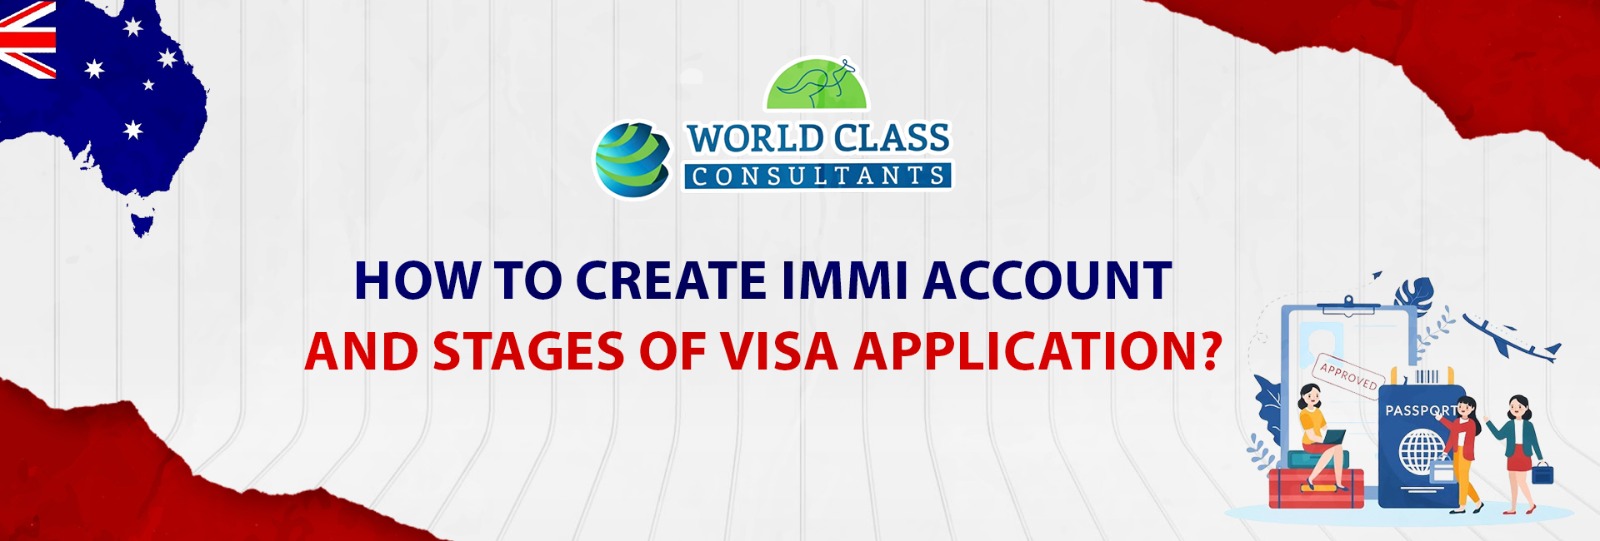 Quick guide on creating an Immi account for easy visa processing